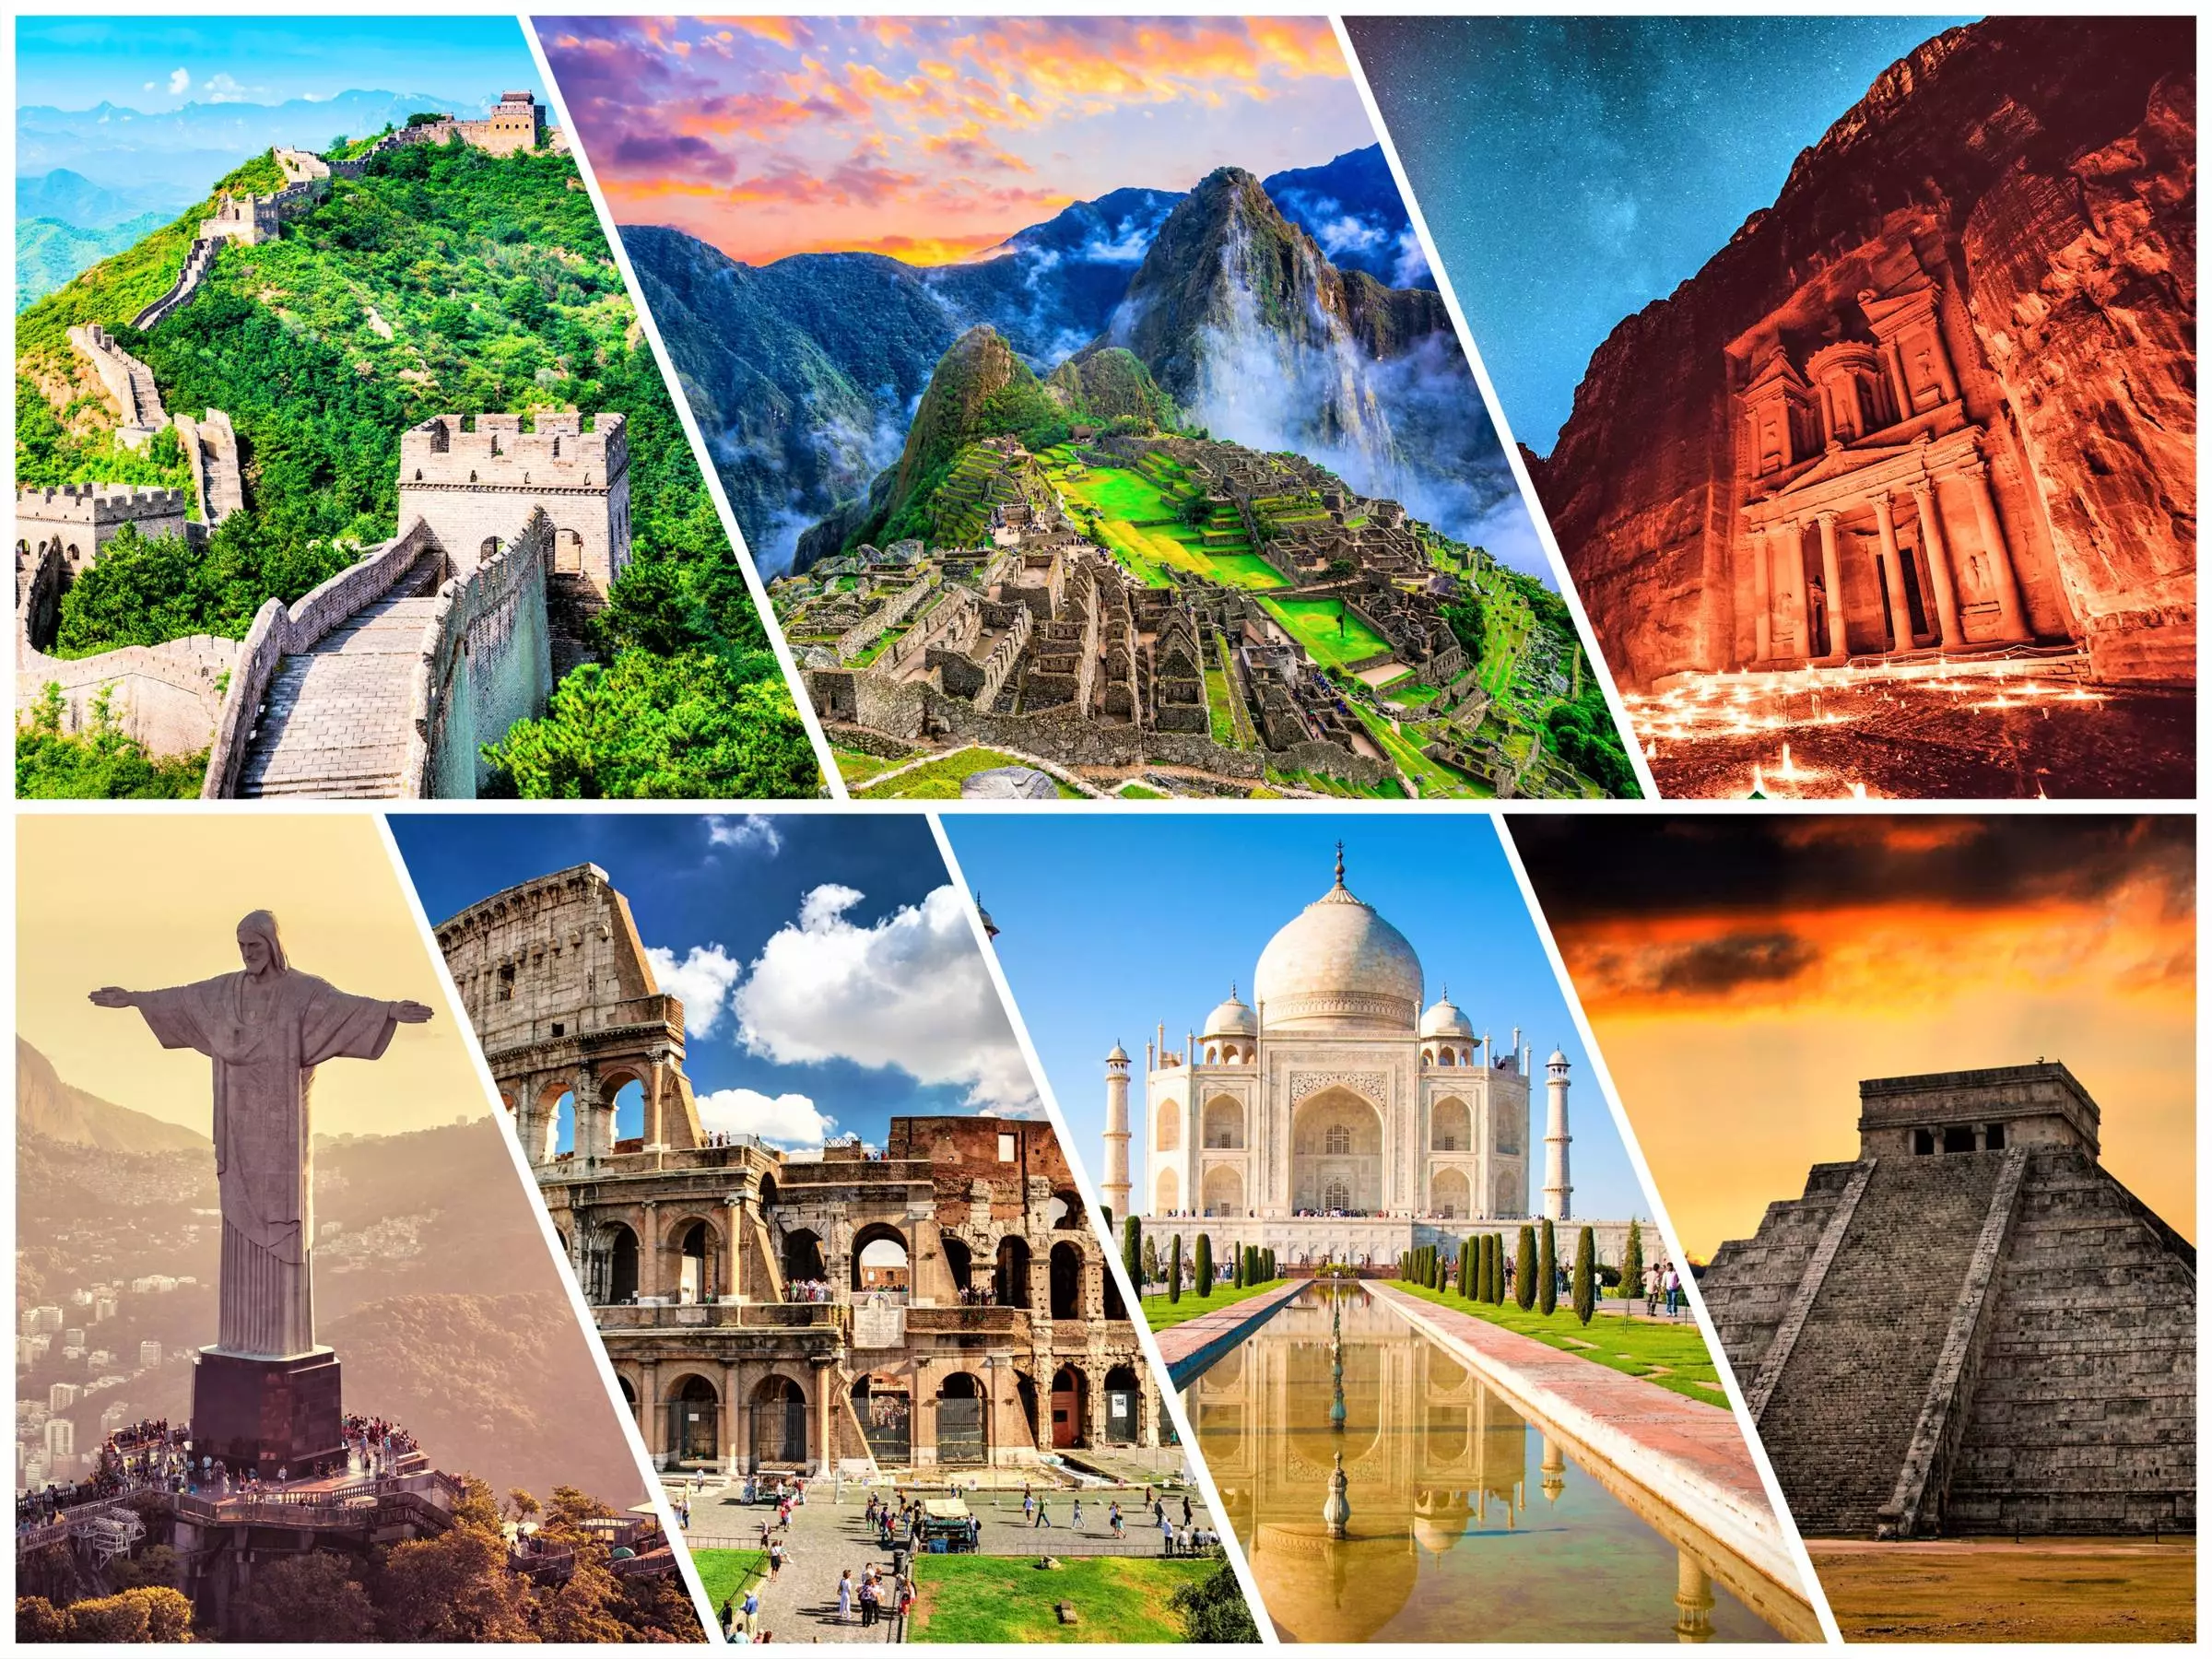 New Seven Wonders of the World